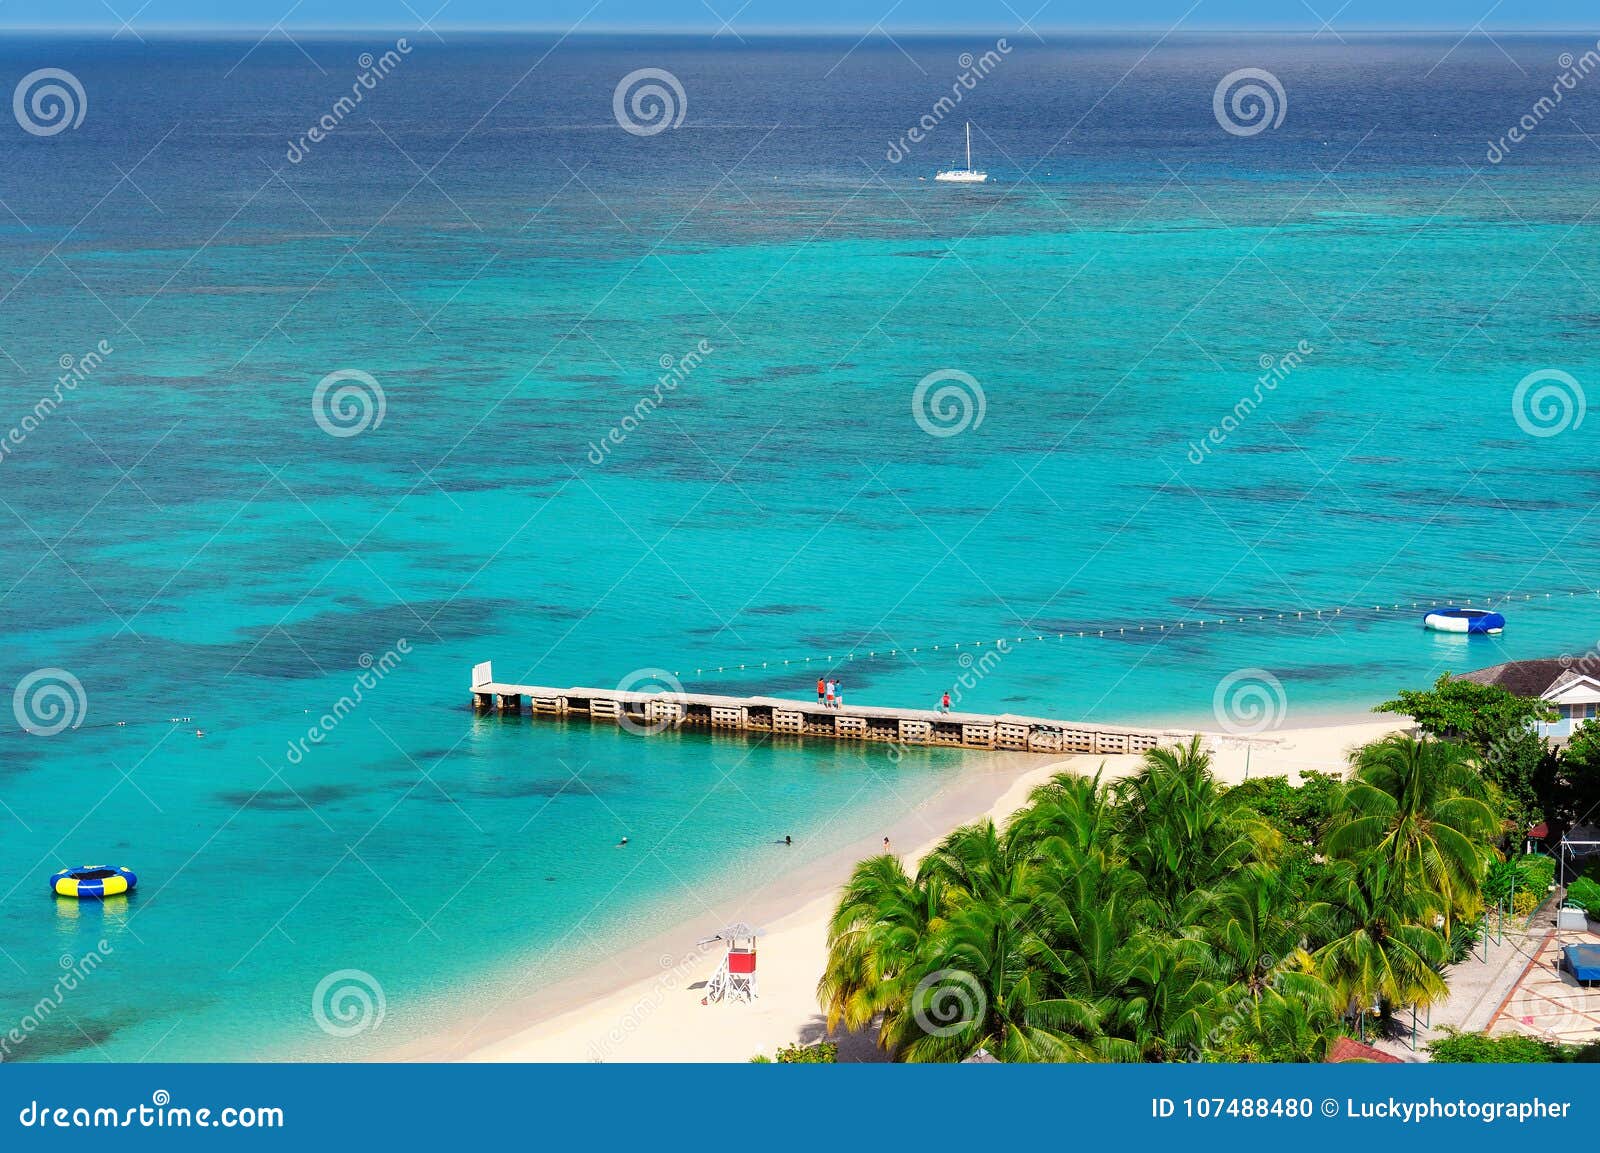 aerial view on beautiful caribbean beach and pier in montego bay, jamaica island.